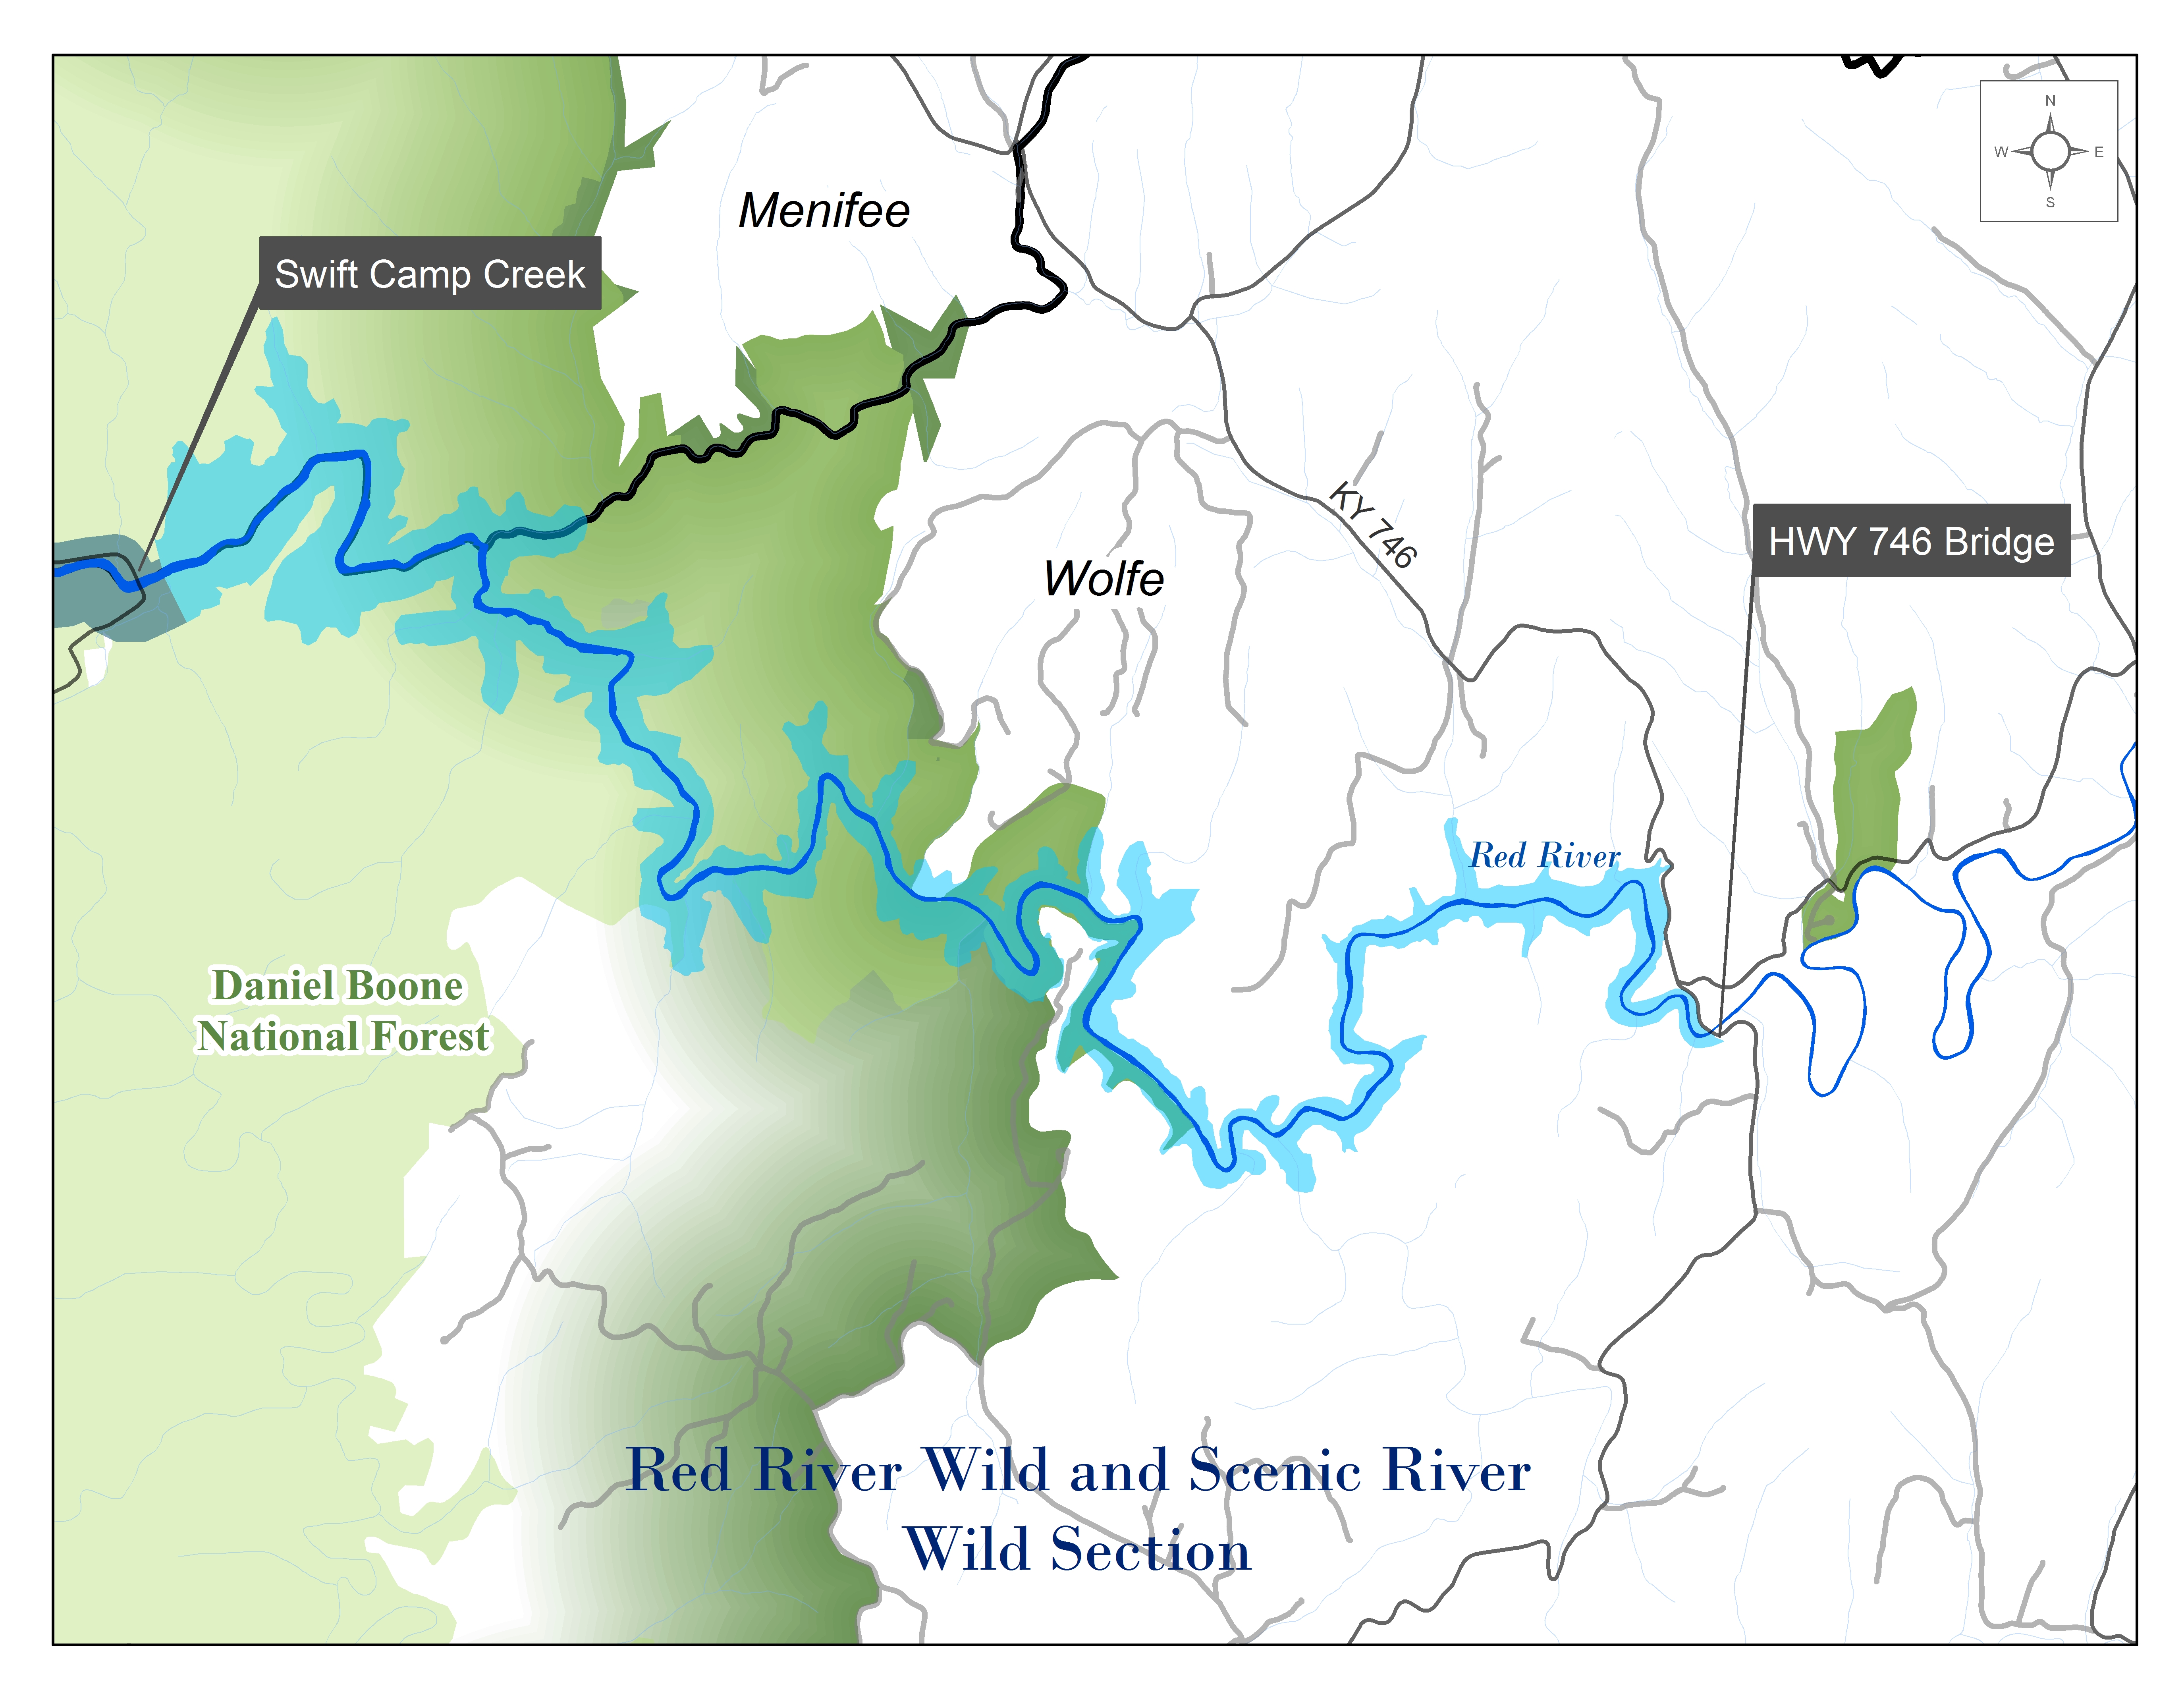 Map of the Wild Section of the Wild and Scenic Red River.